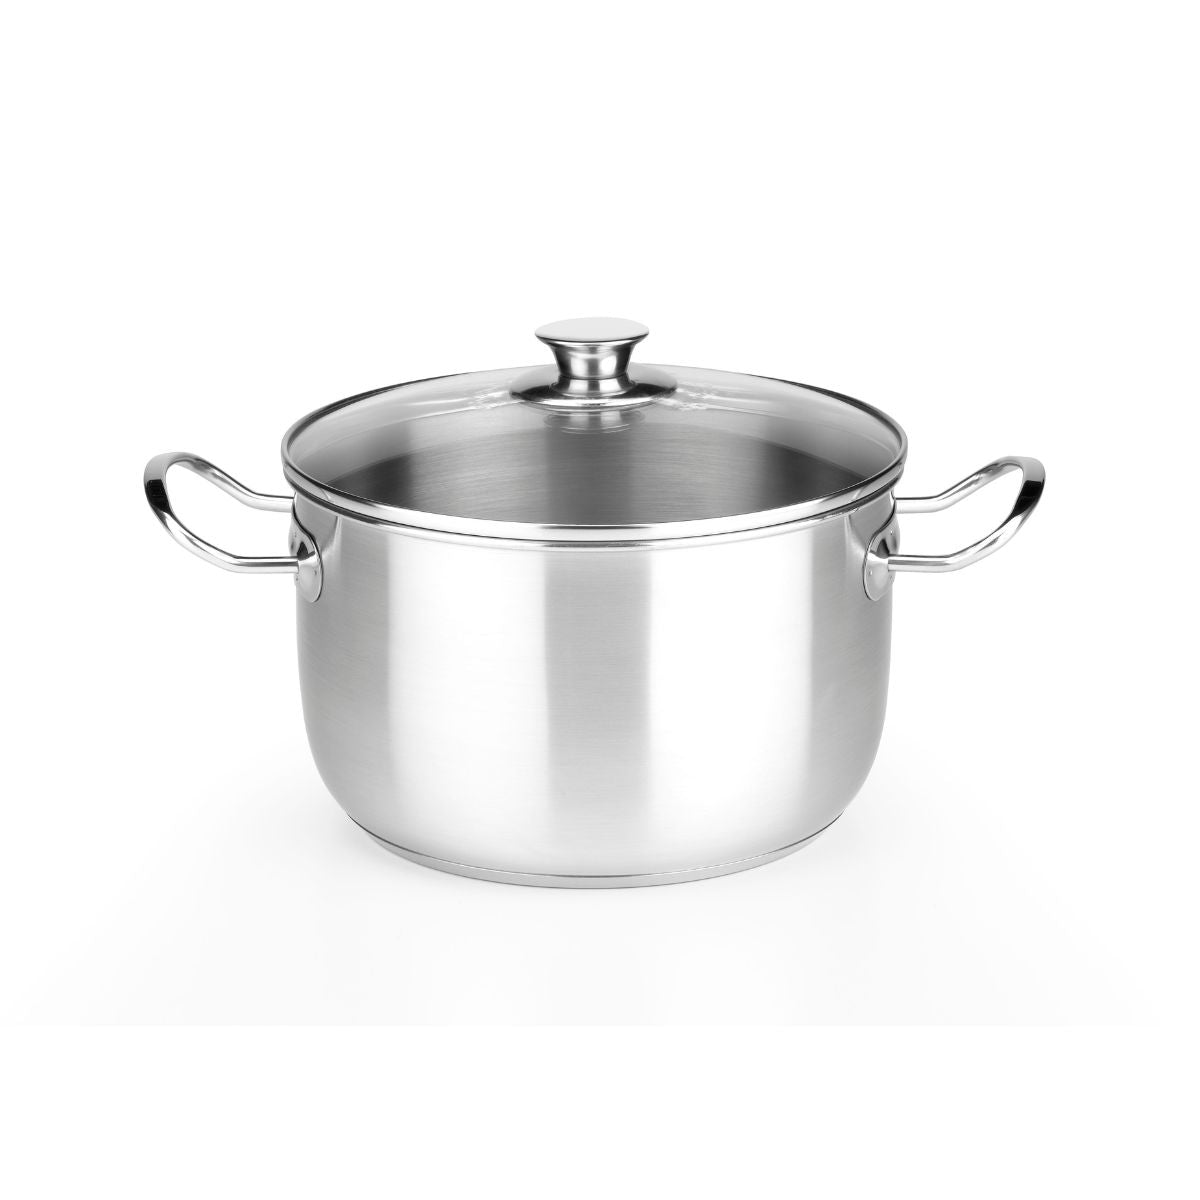 Chef Pot with Glass Lid